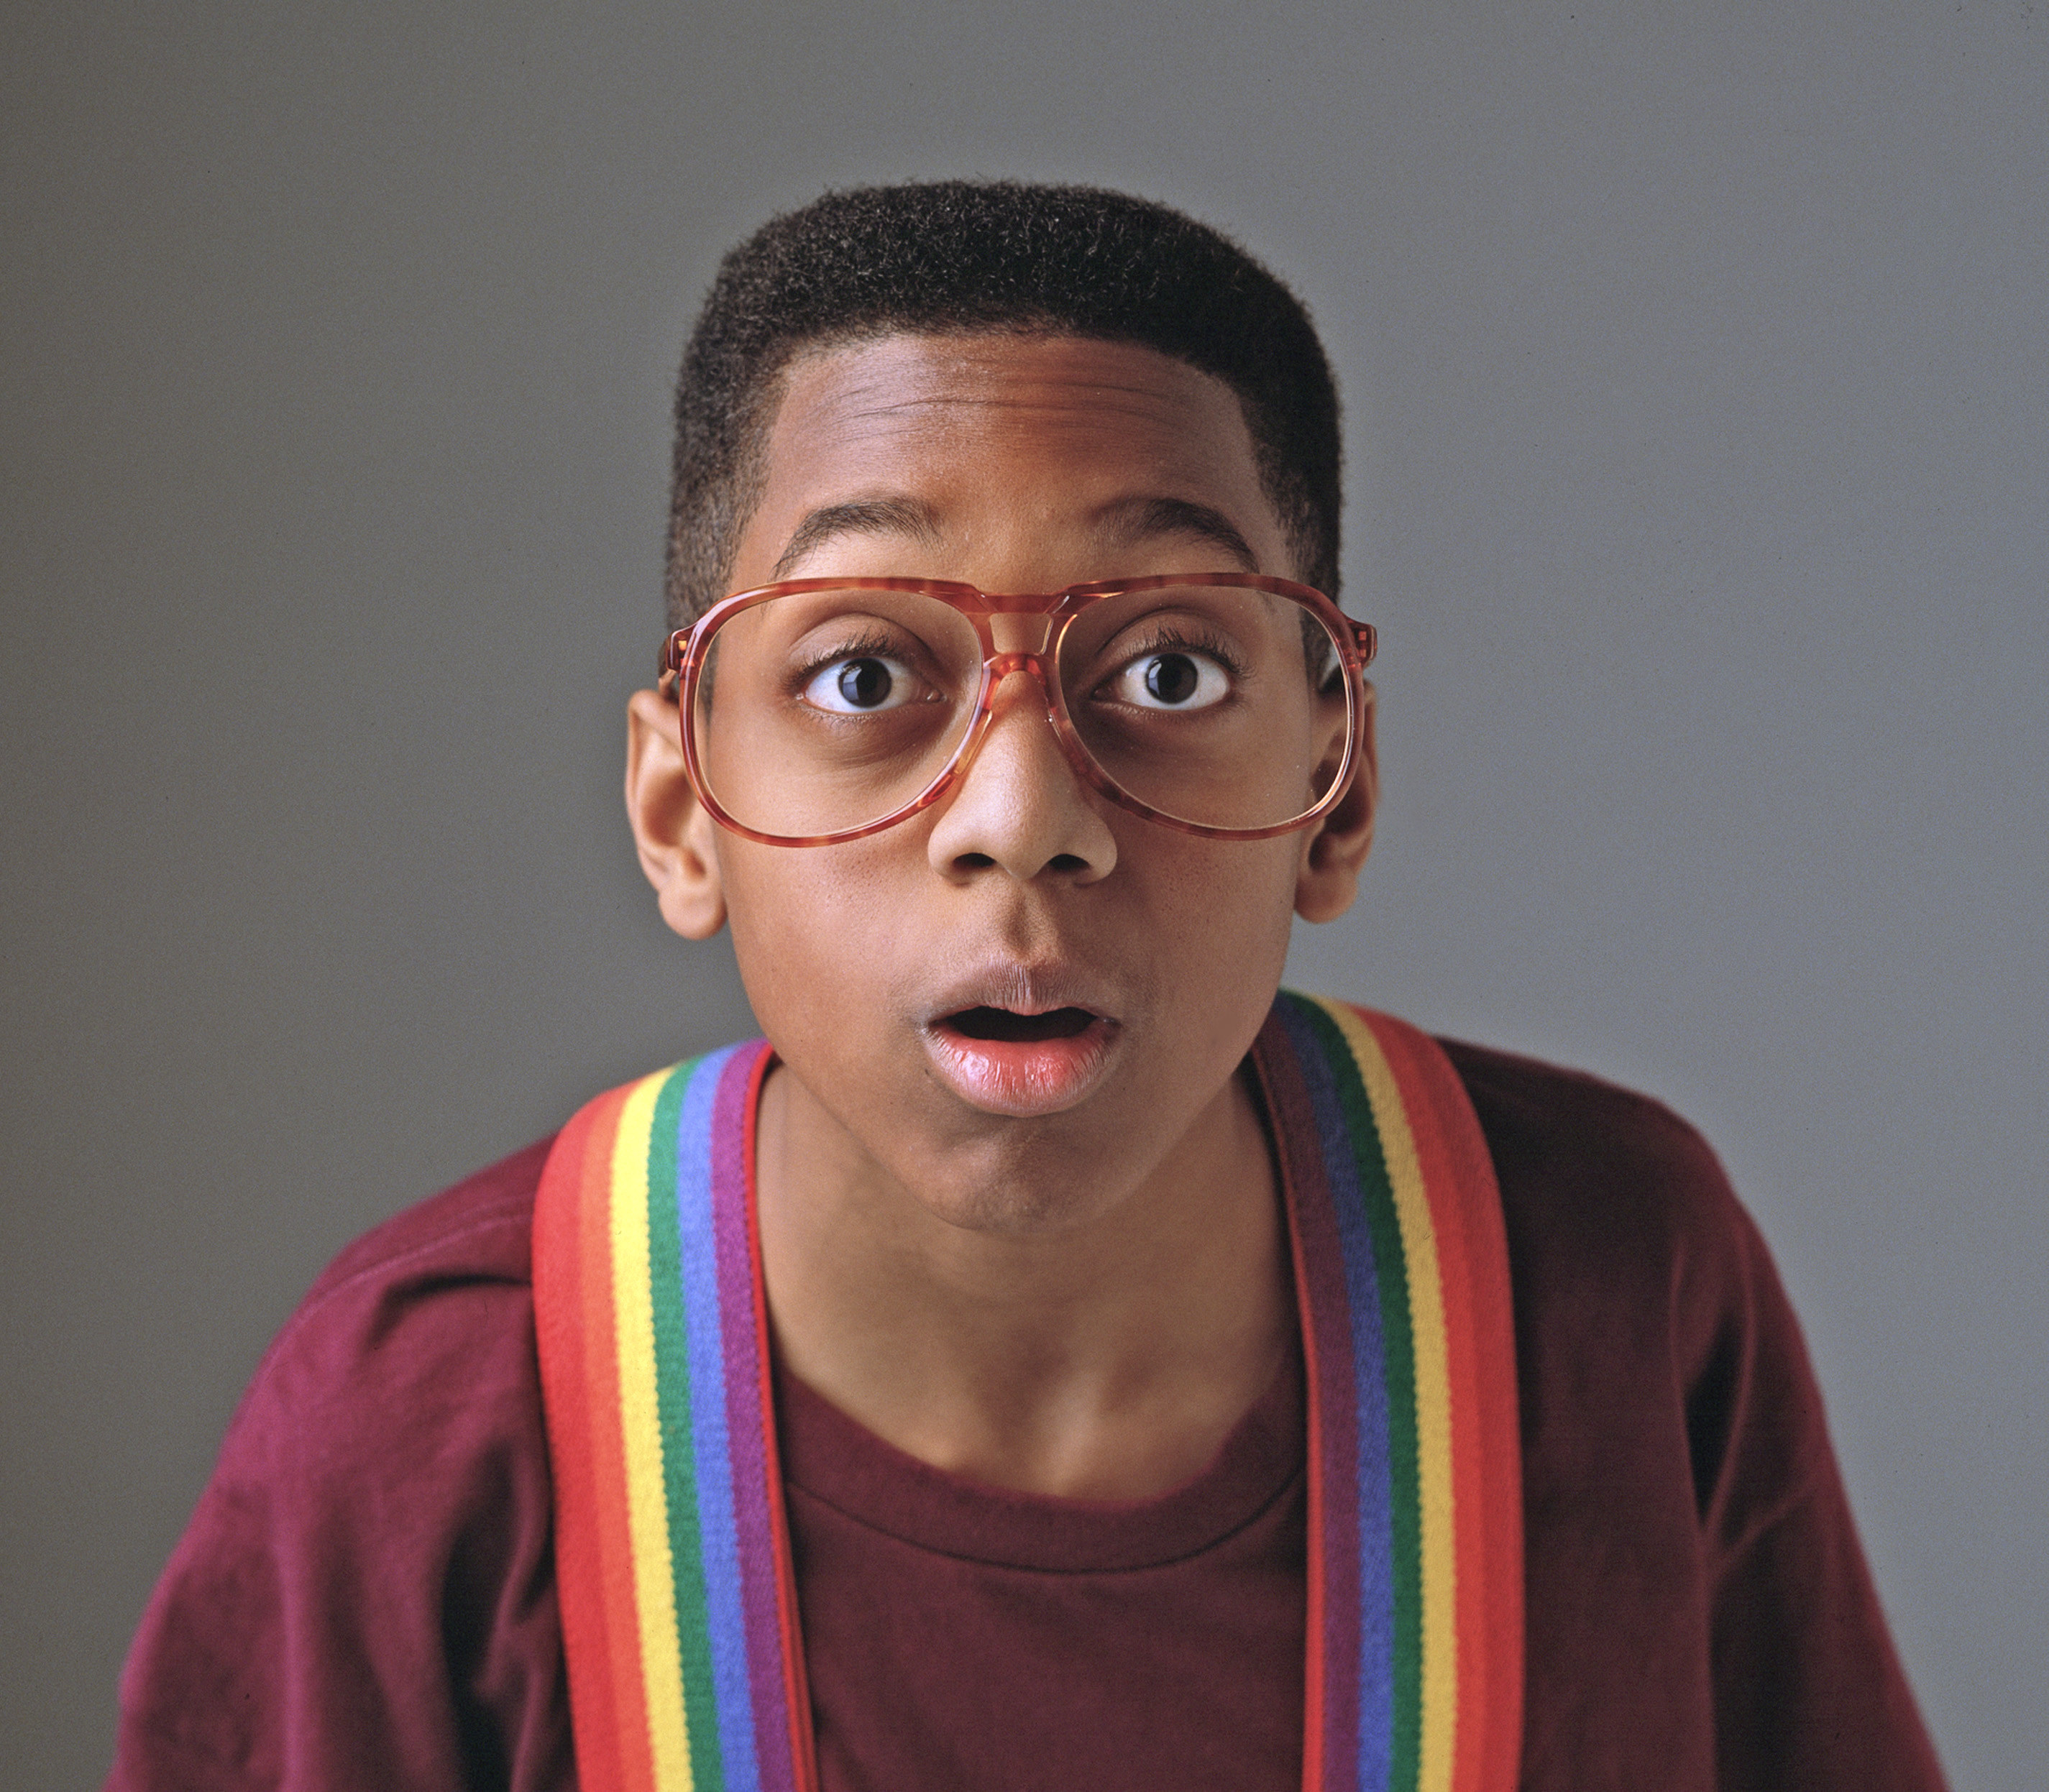 Family Matters' Steve Urkel was. named. after a real person. 